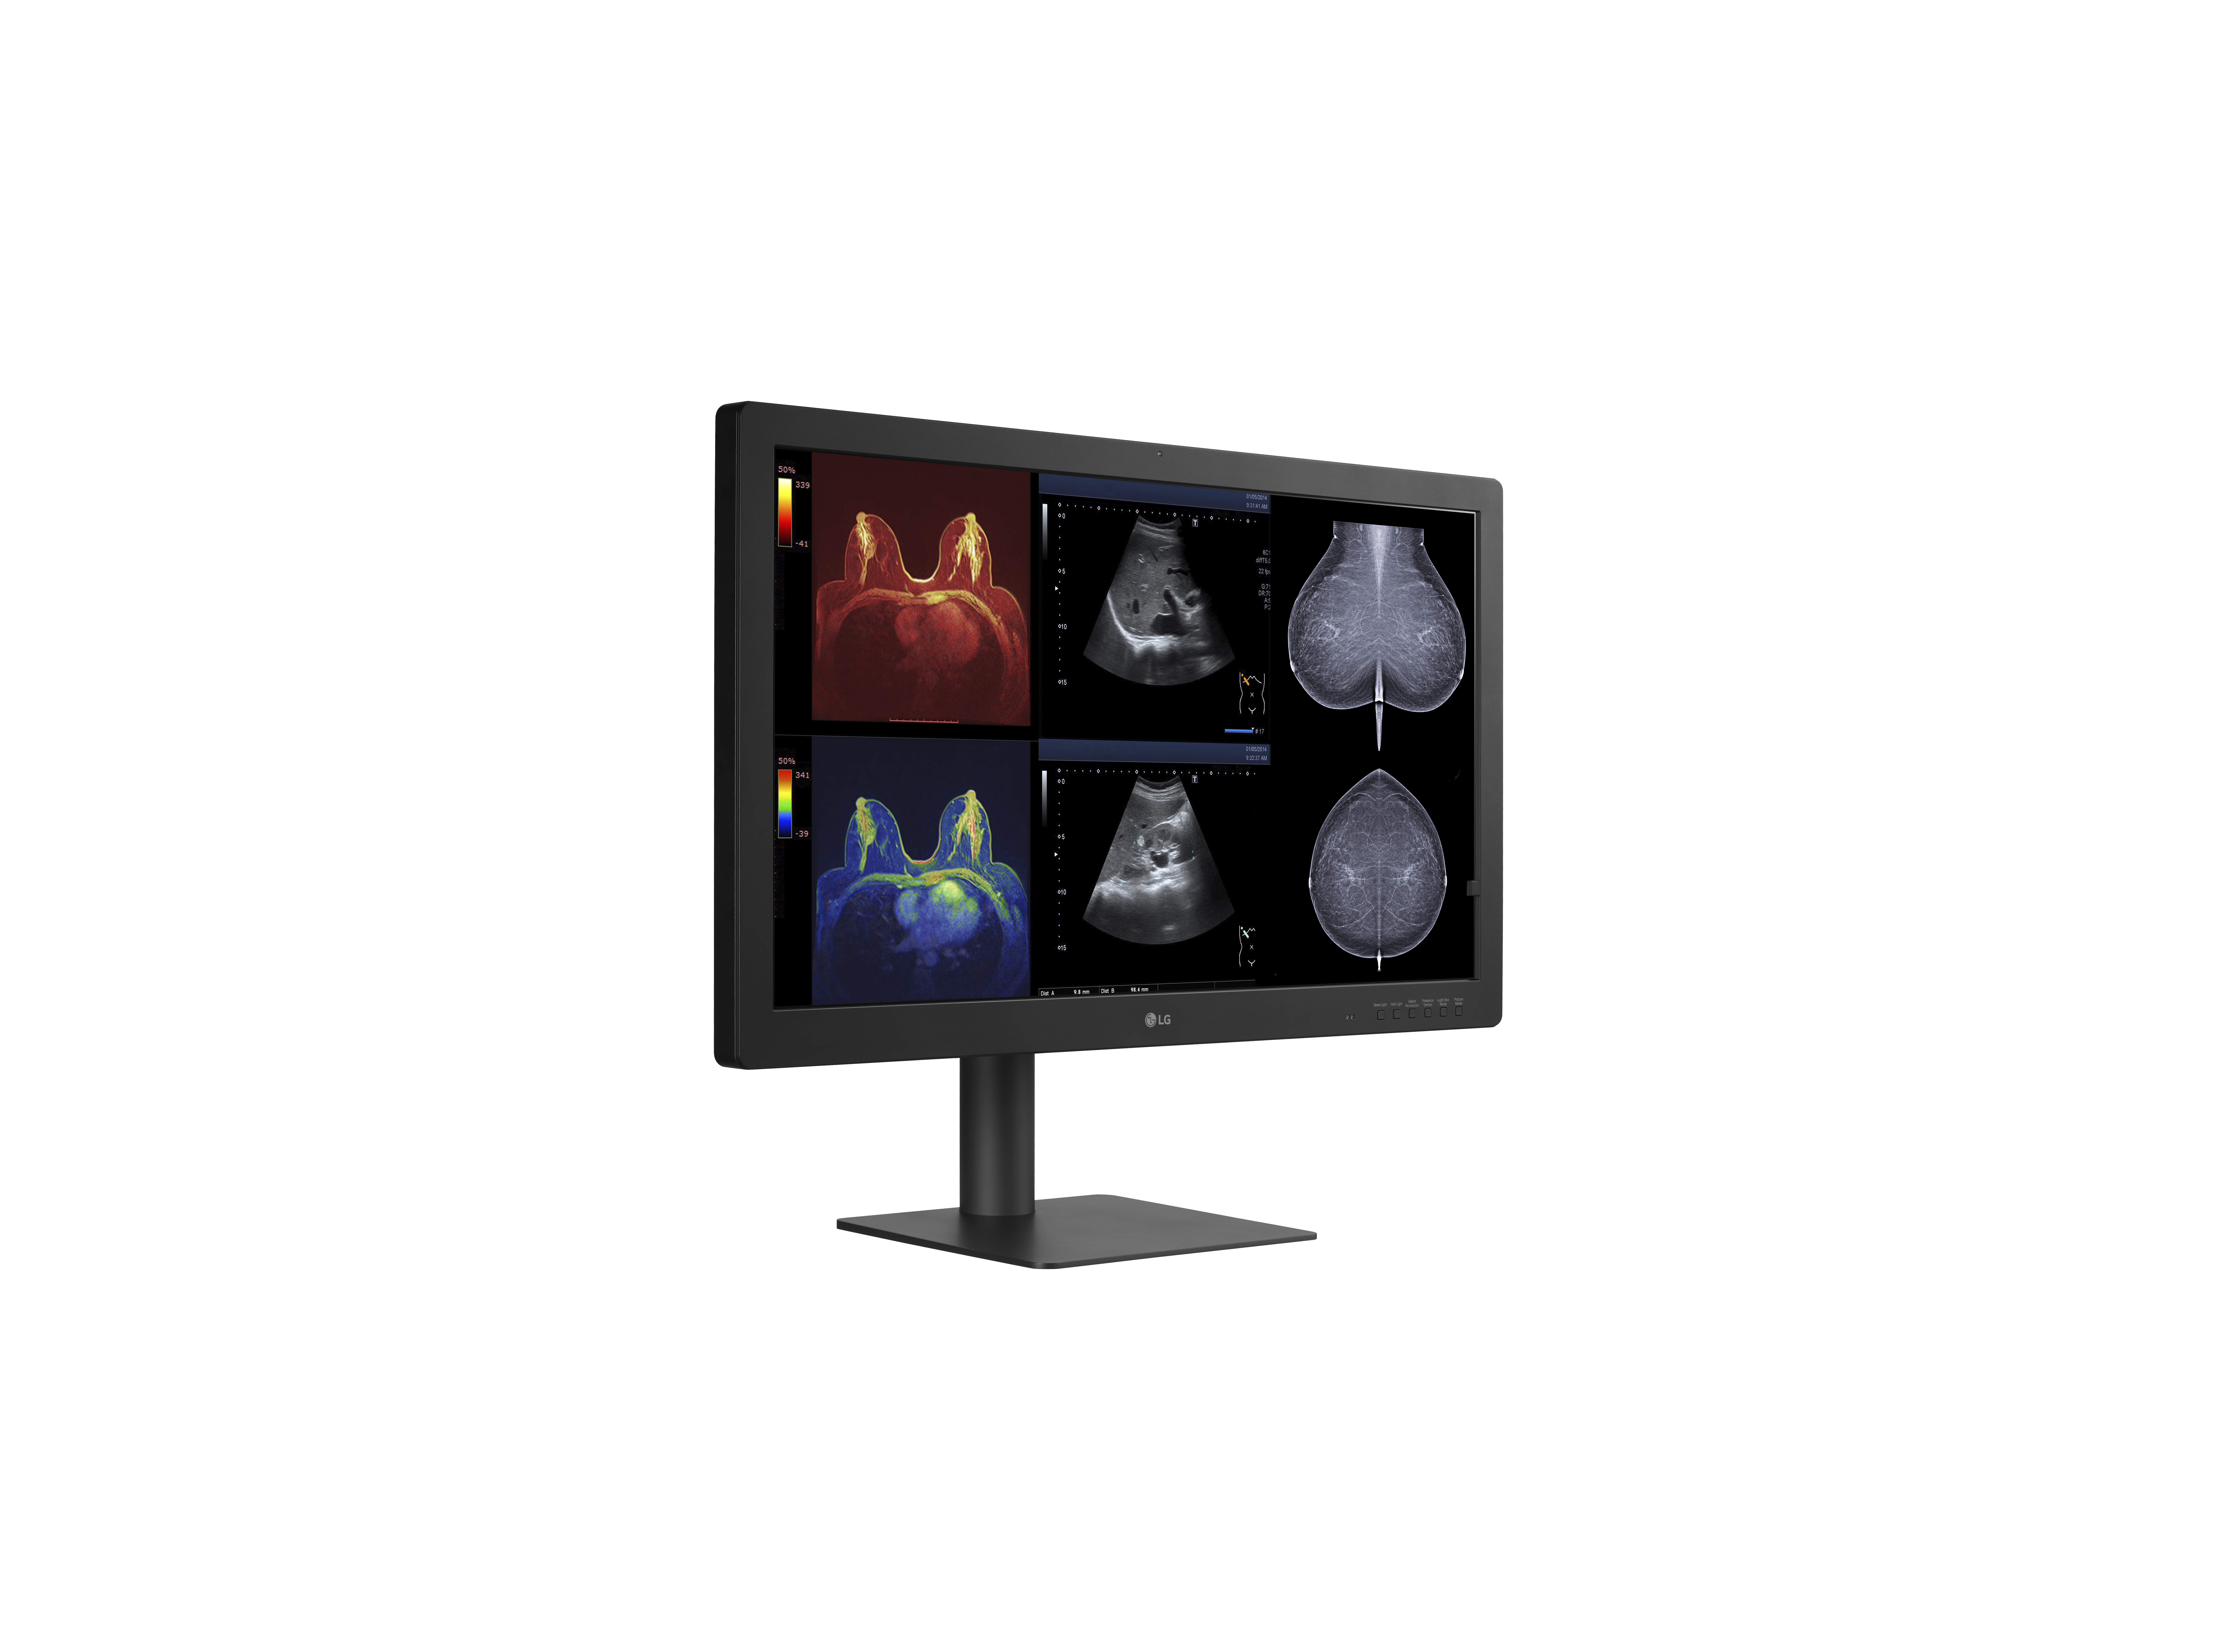 An image showcasing the LG IPS Black Diagnostic Monitor, a cutting-edge display technology for enhanced medical imaging. The monitor exhibits a sleek design with high resolution, wide color gamut, and precise calibration features, ensuring clarity and accuracy in diagnostic interpretations for healthcare professionals.